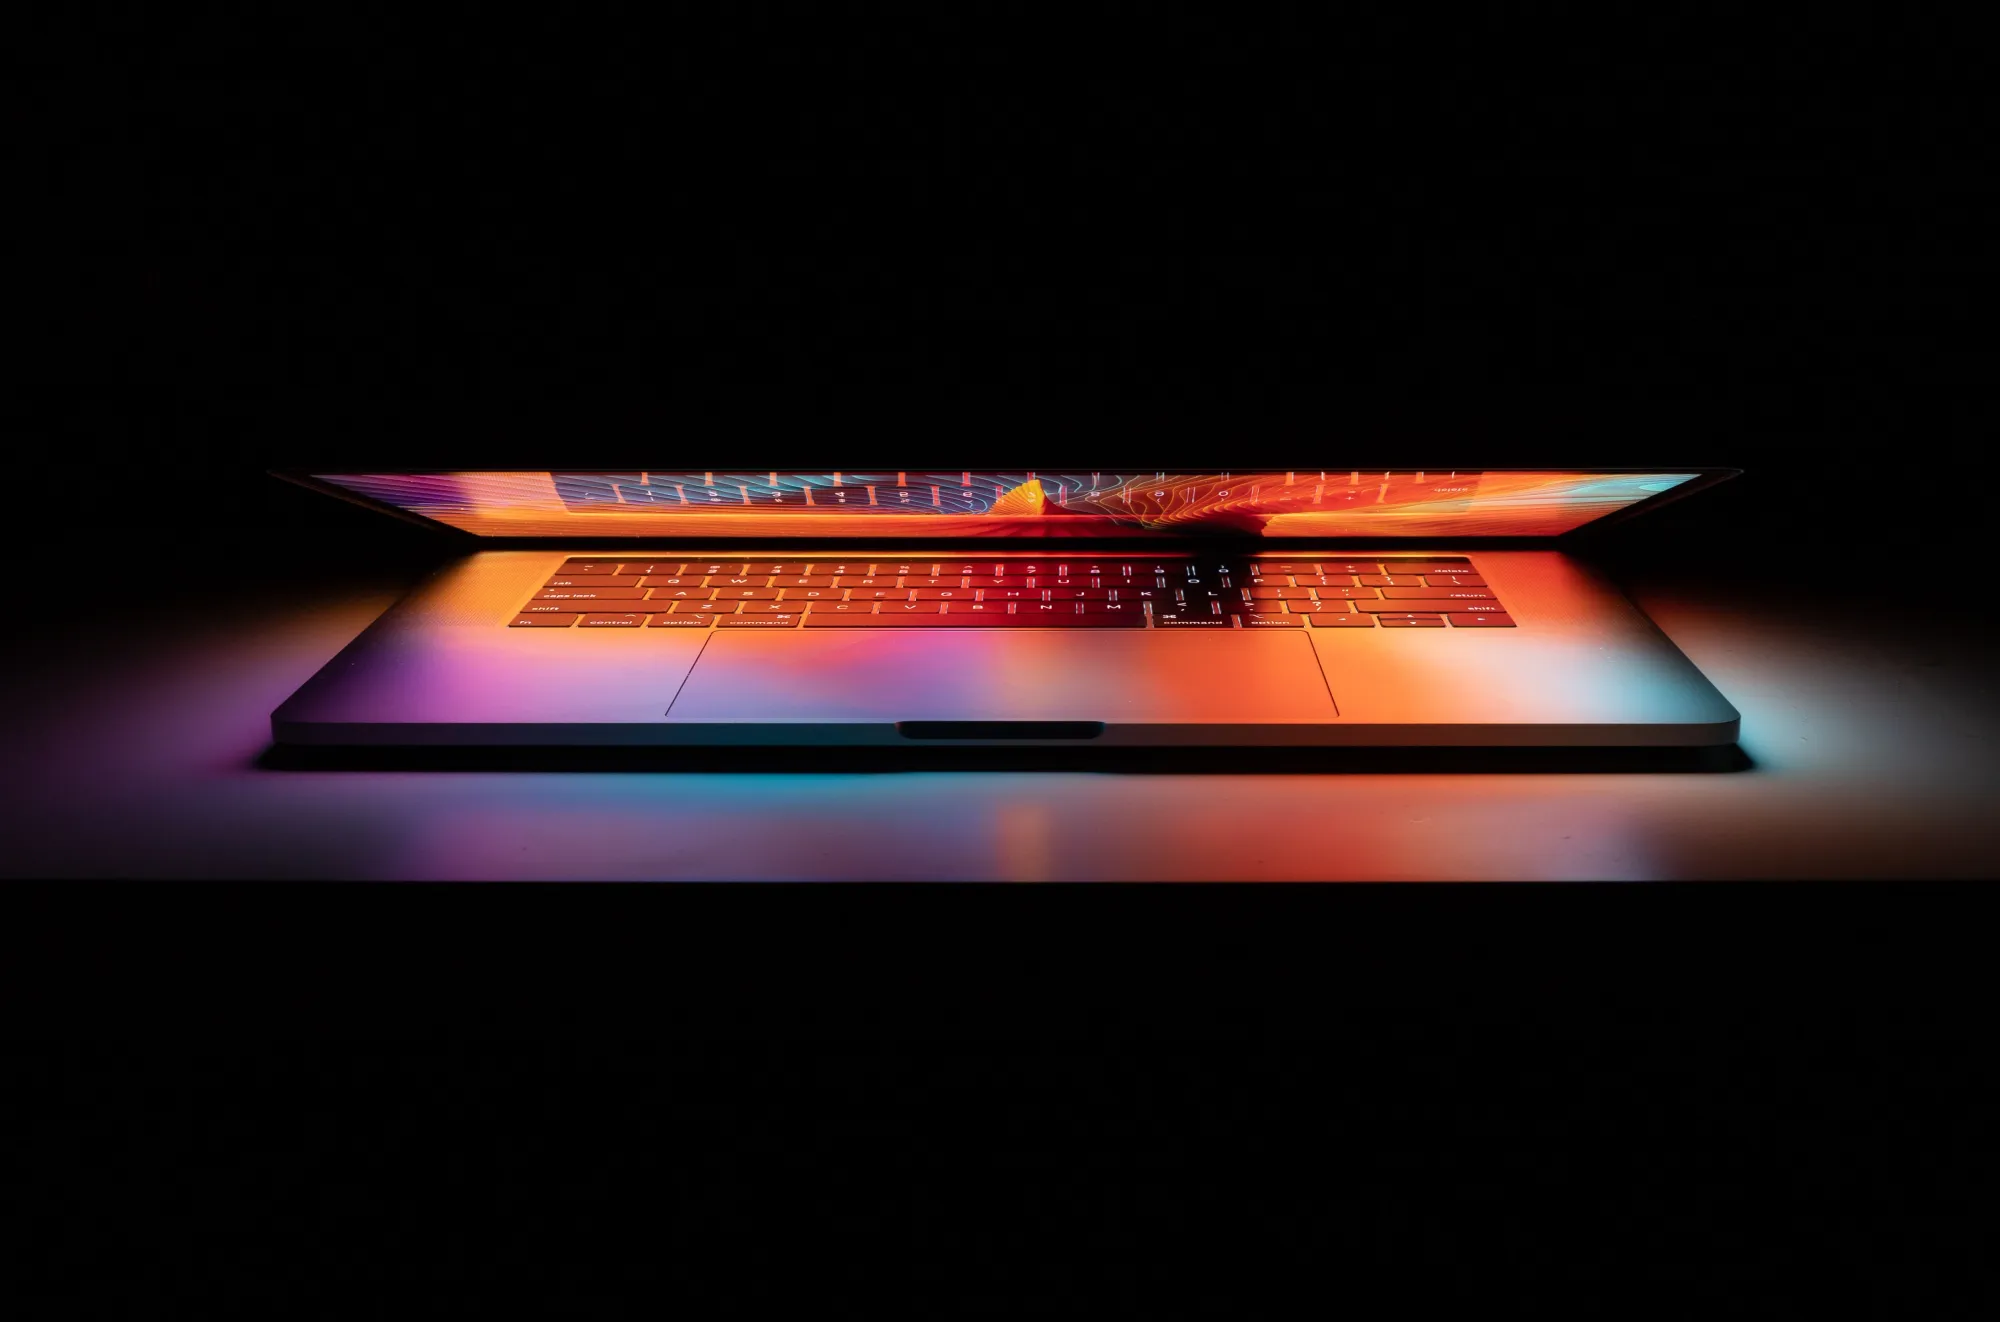 MacBook glows colorful in the darkness